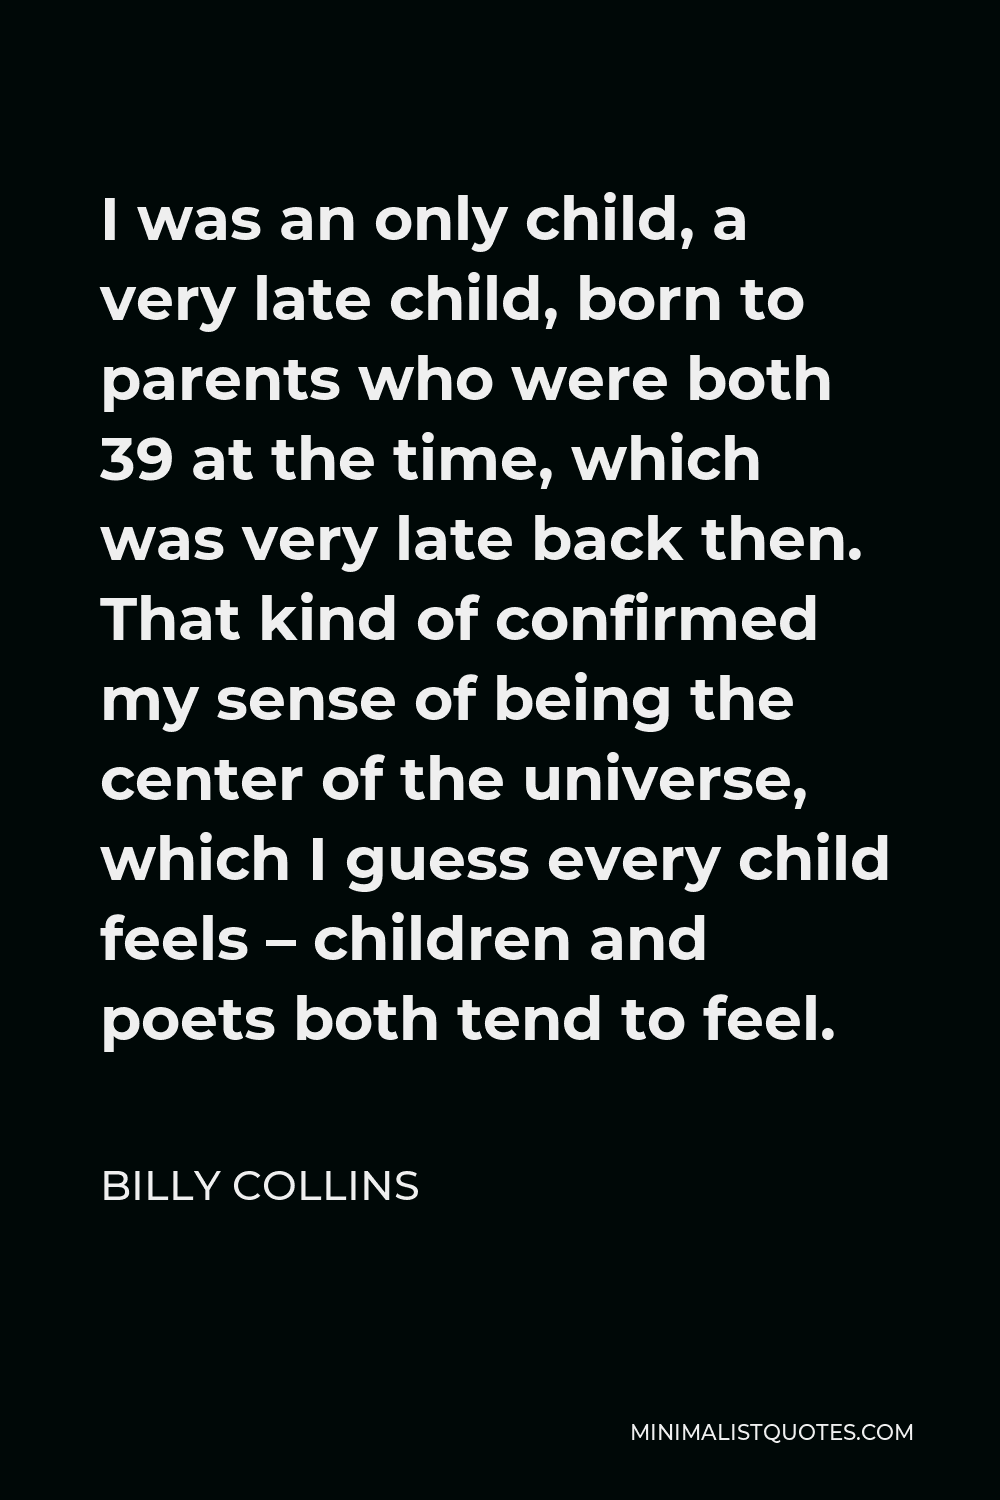 Billy Collins Quote - I was an only child, a very late child, born to parents who were both 39 at the time, which was very late back then. That kind of confirmed my sense of being the center of the universe, which I guess every child feels – children and poets both tend to feel.